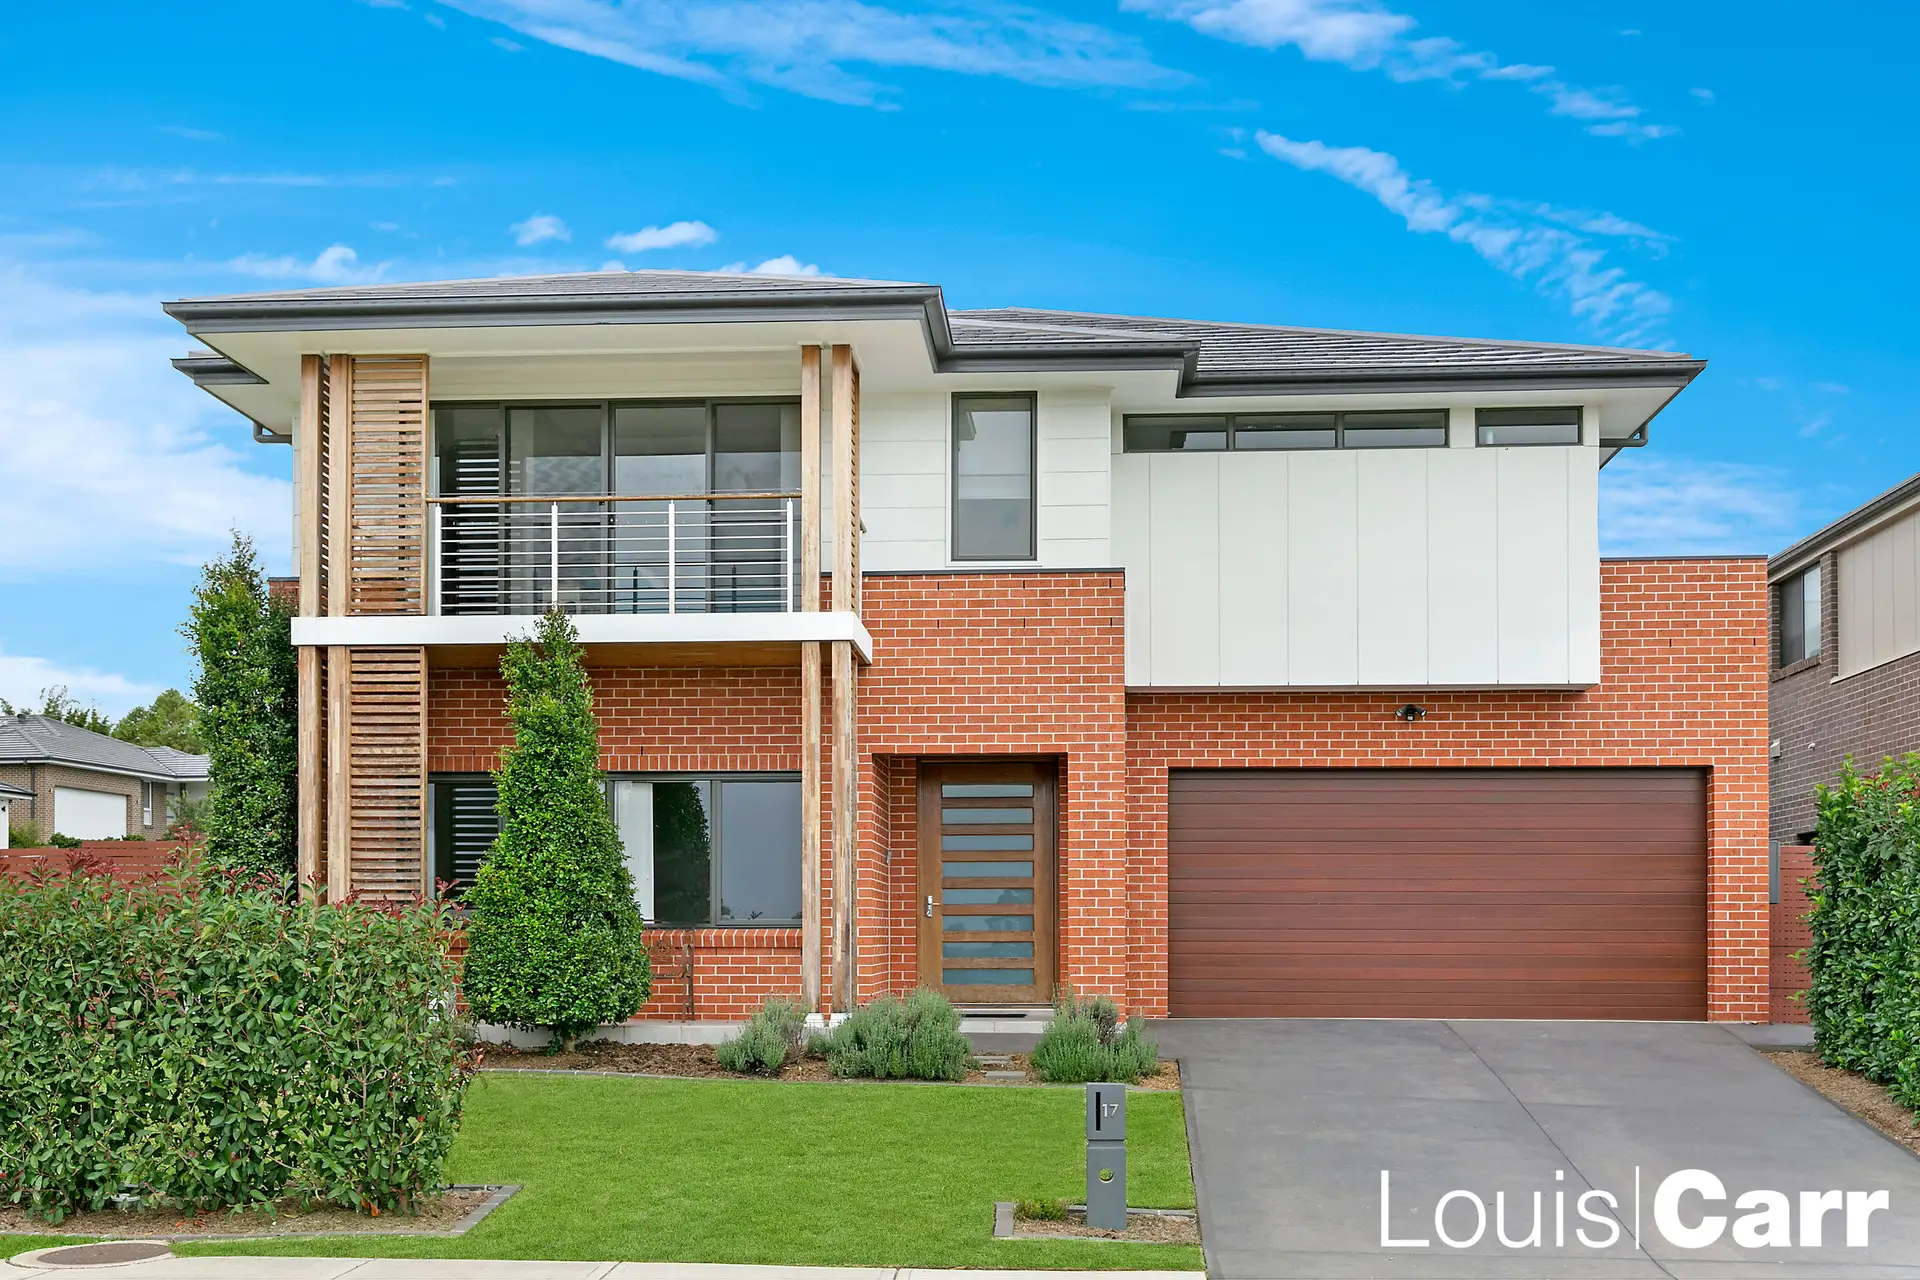 Photo #1: 17 Florence Avenue, Kellyville - Sold by Louis Carr Real Estate